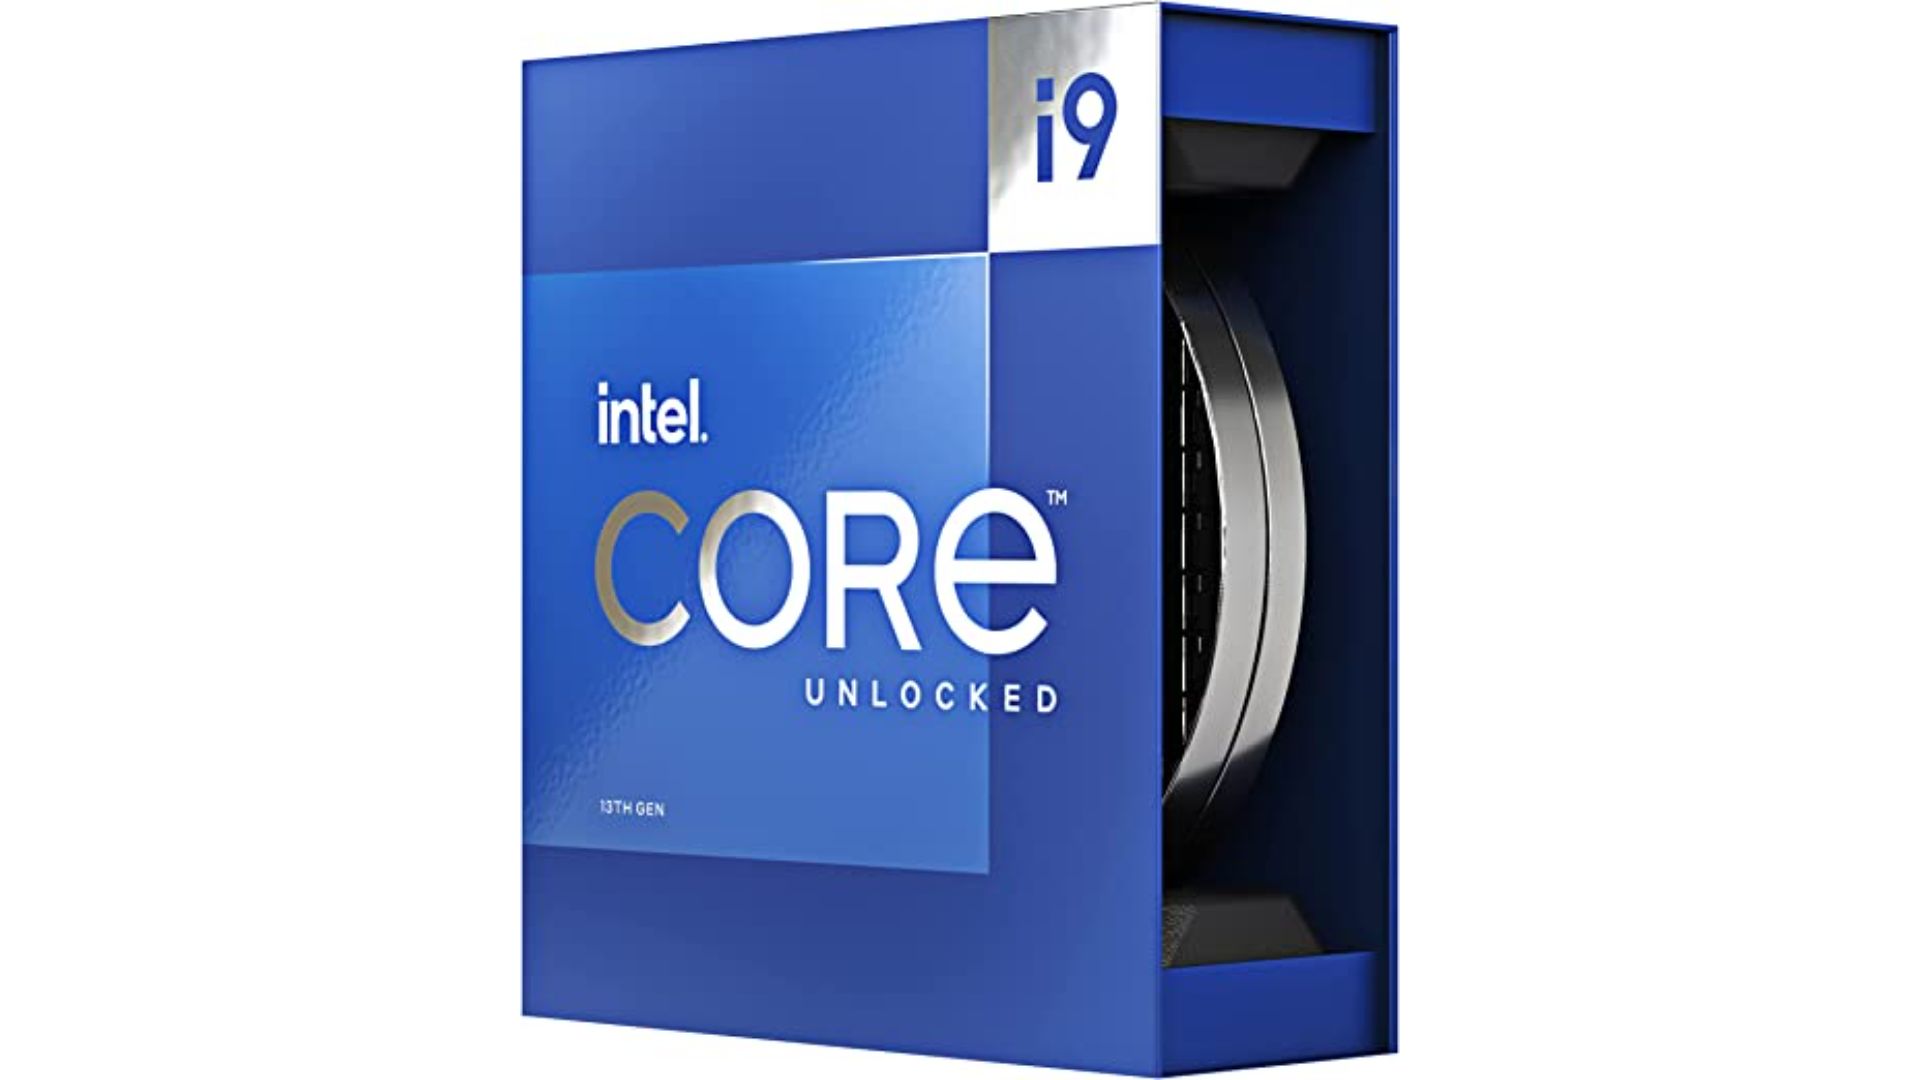 Intel Core i9-13900K - Best CPU For SolidWorks Users